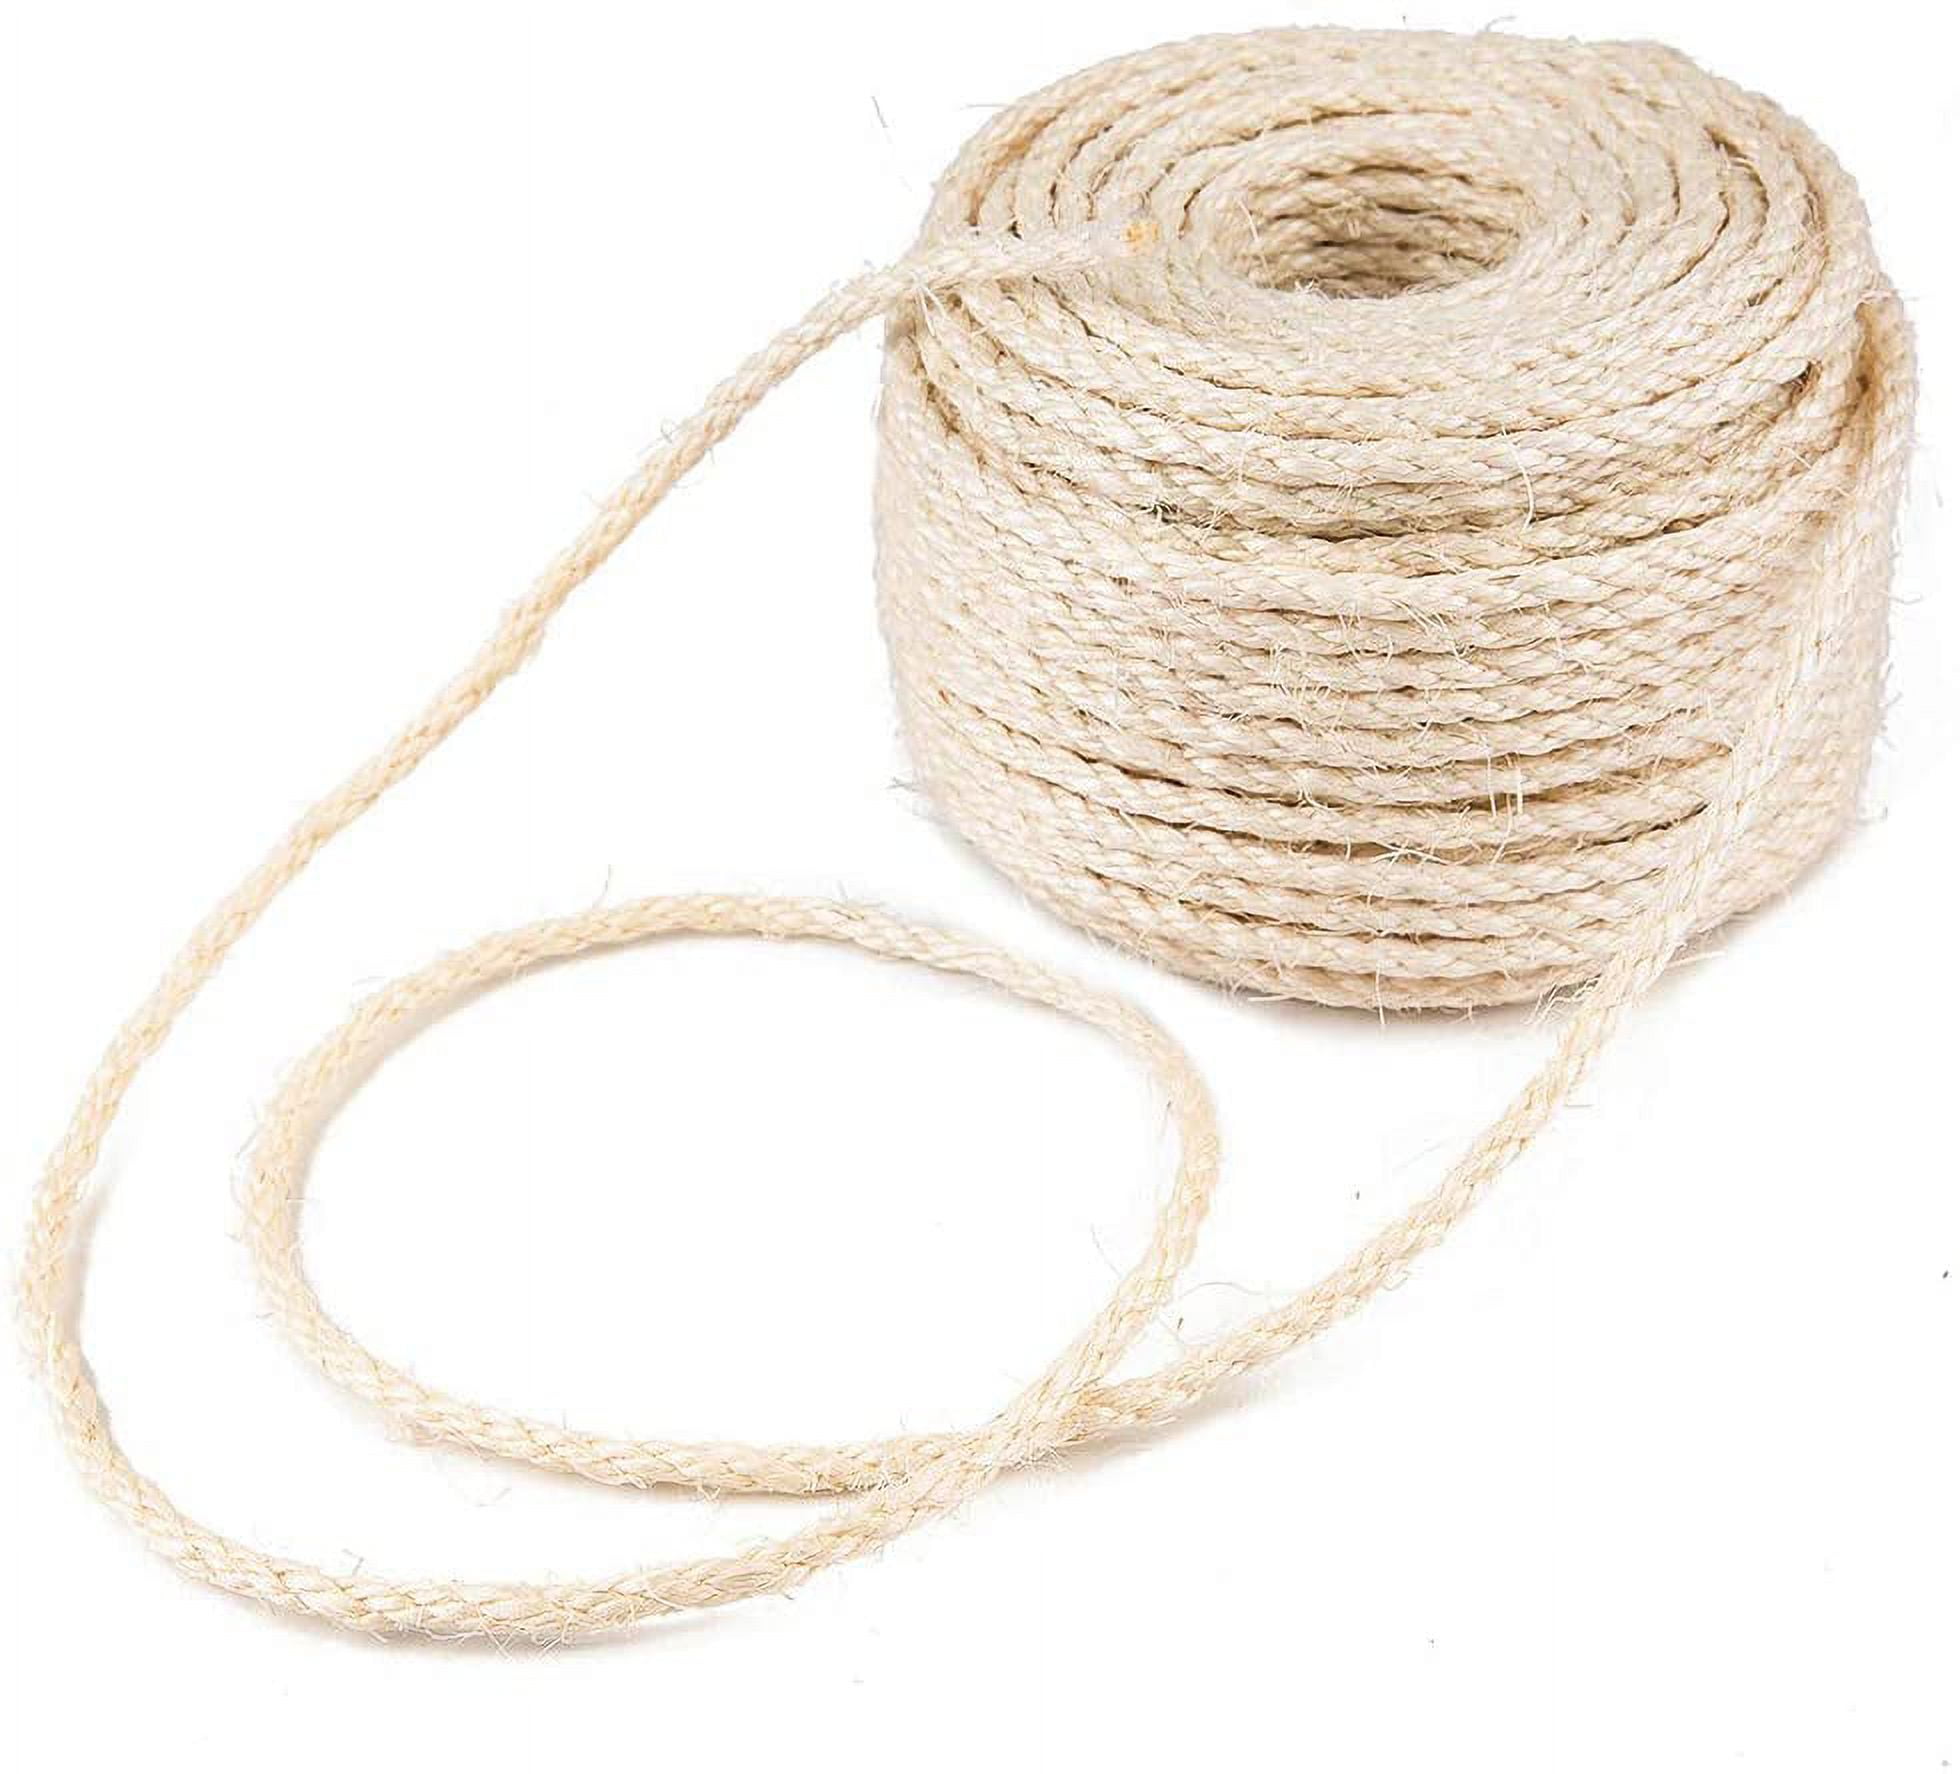 Sisal Twine - Thin Natural Fiber Rope on Spool - Rope for Cat Scratching  Post Sisal Rope for Cat Scratcher, Cat Tree Replacement Parts, Pet Toy -  Decorative Cordage for Crafts, Pole